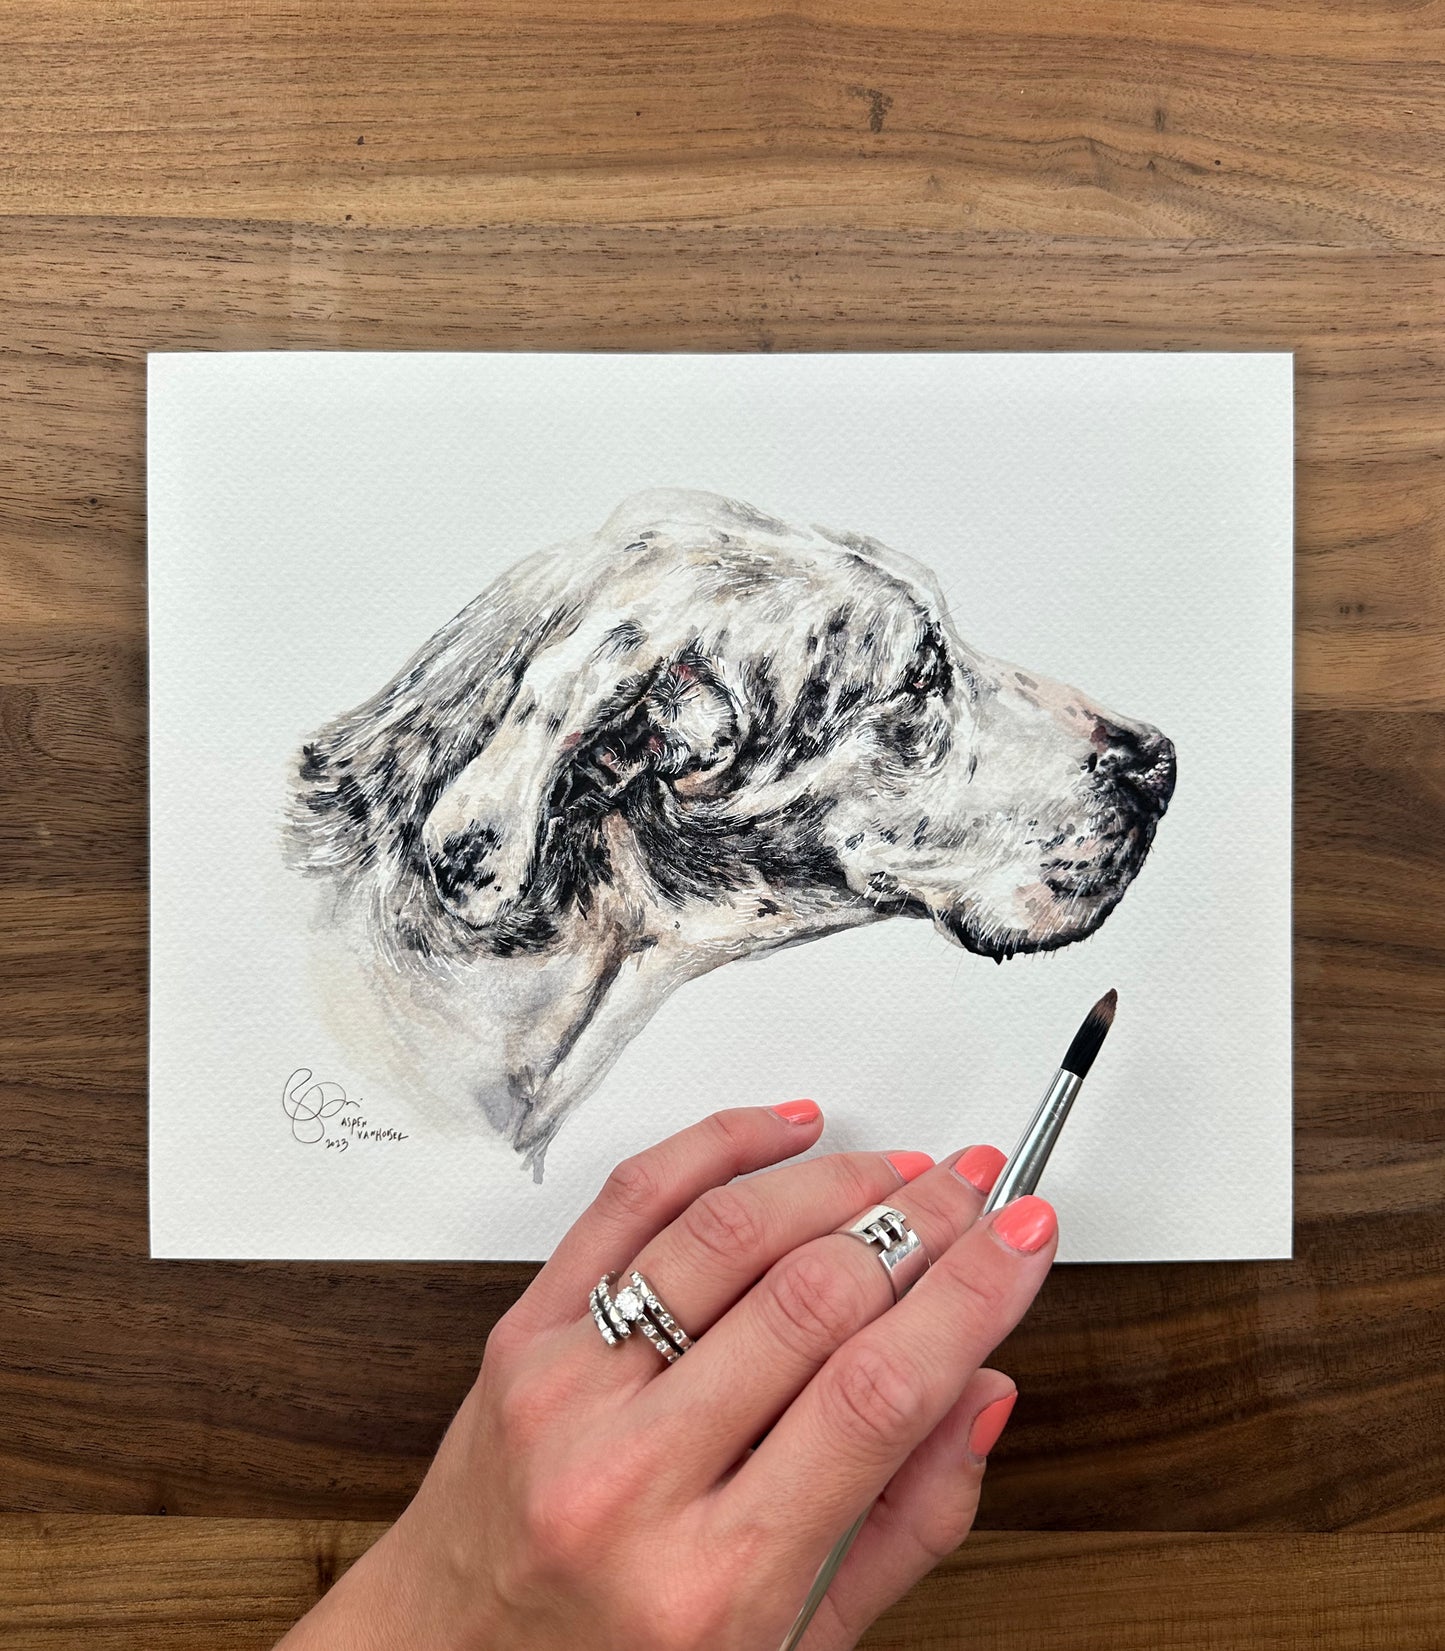 Custom Watercolor Pet Portrait Painting, Made to order, Any Animal